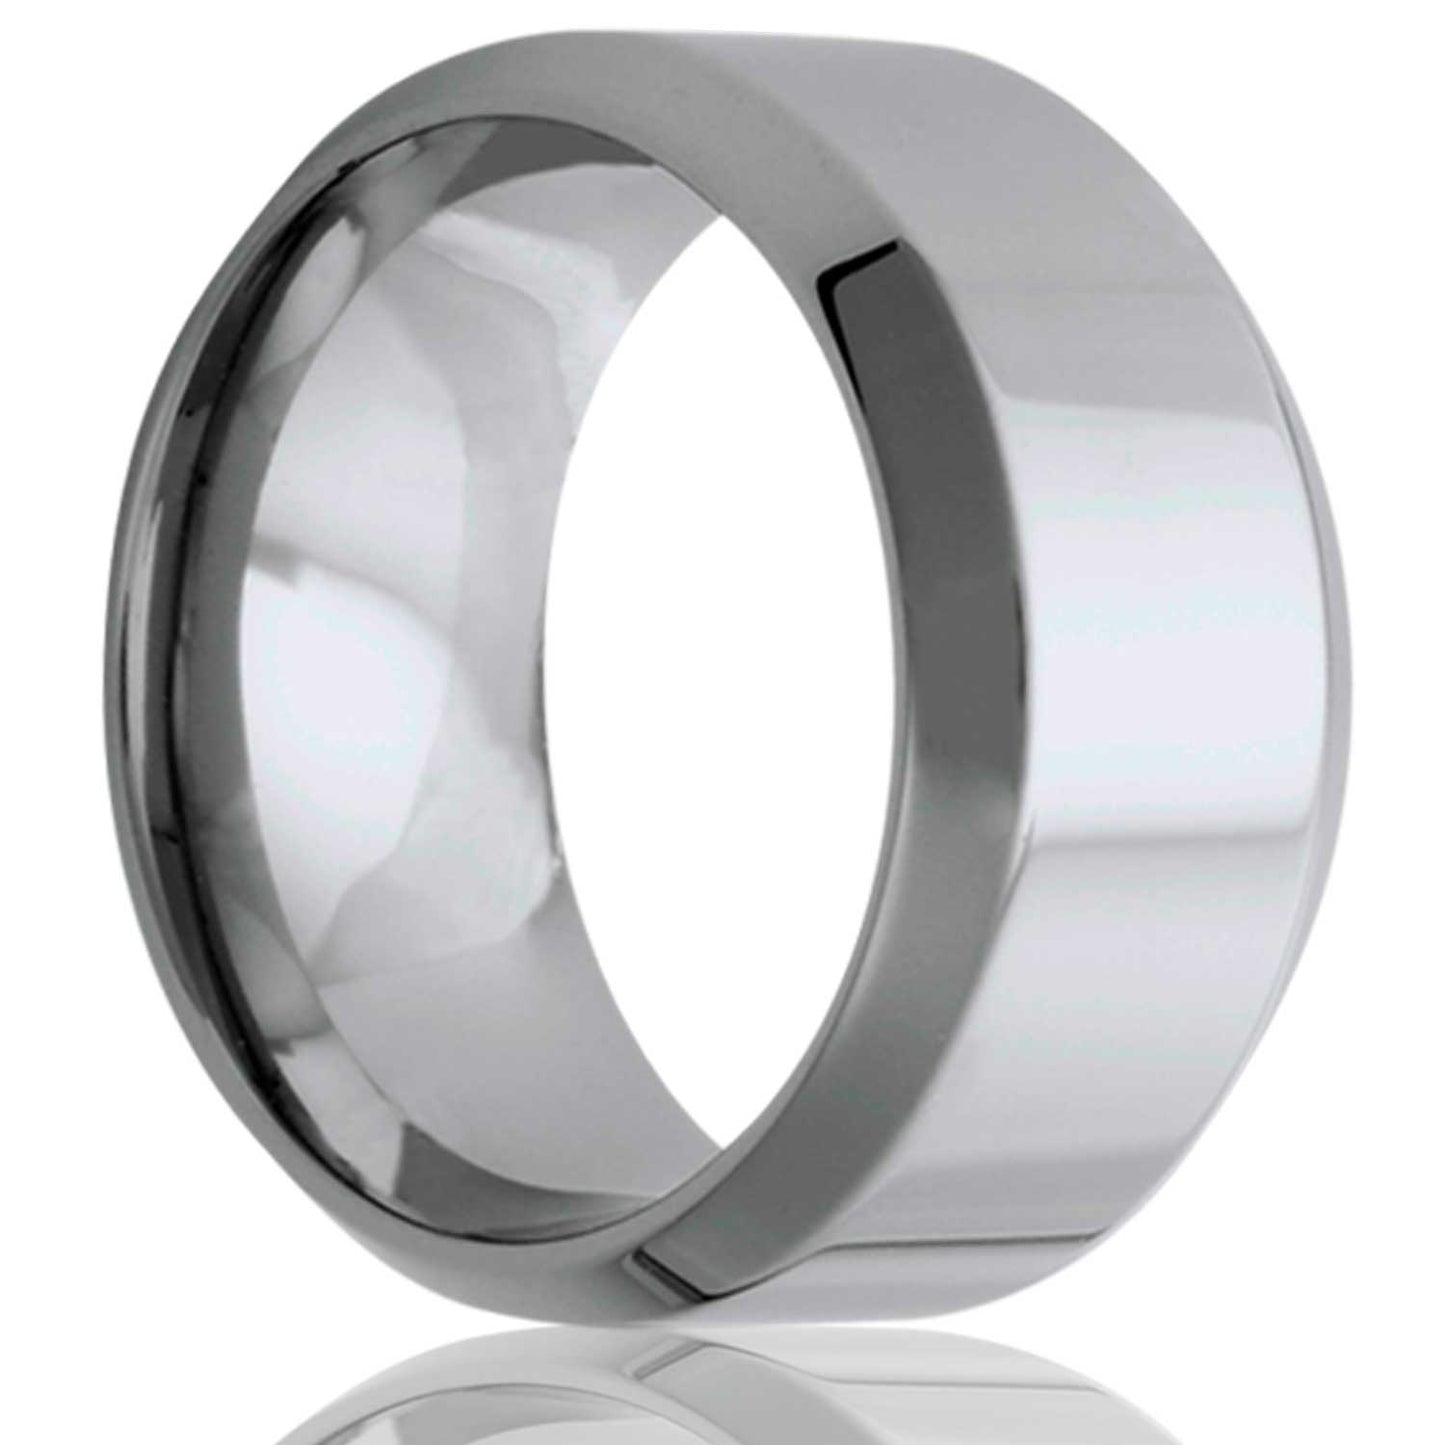 A cobalt wedding band with beveled edges displayed on a neutral white background.